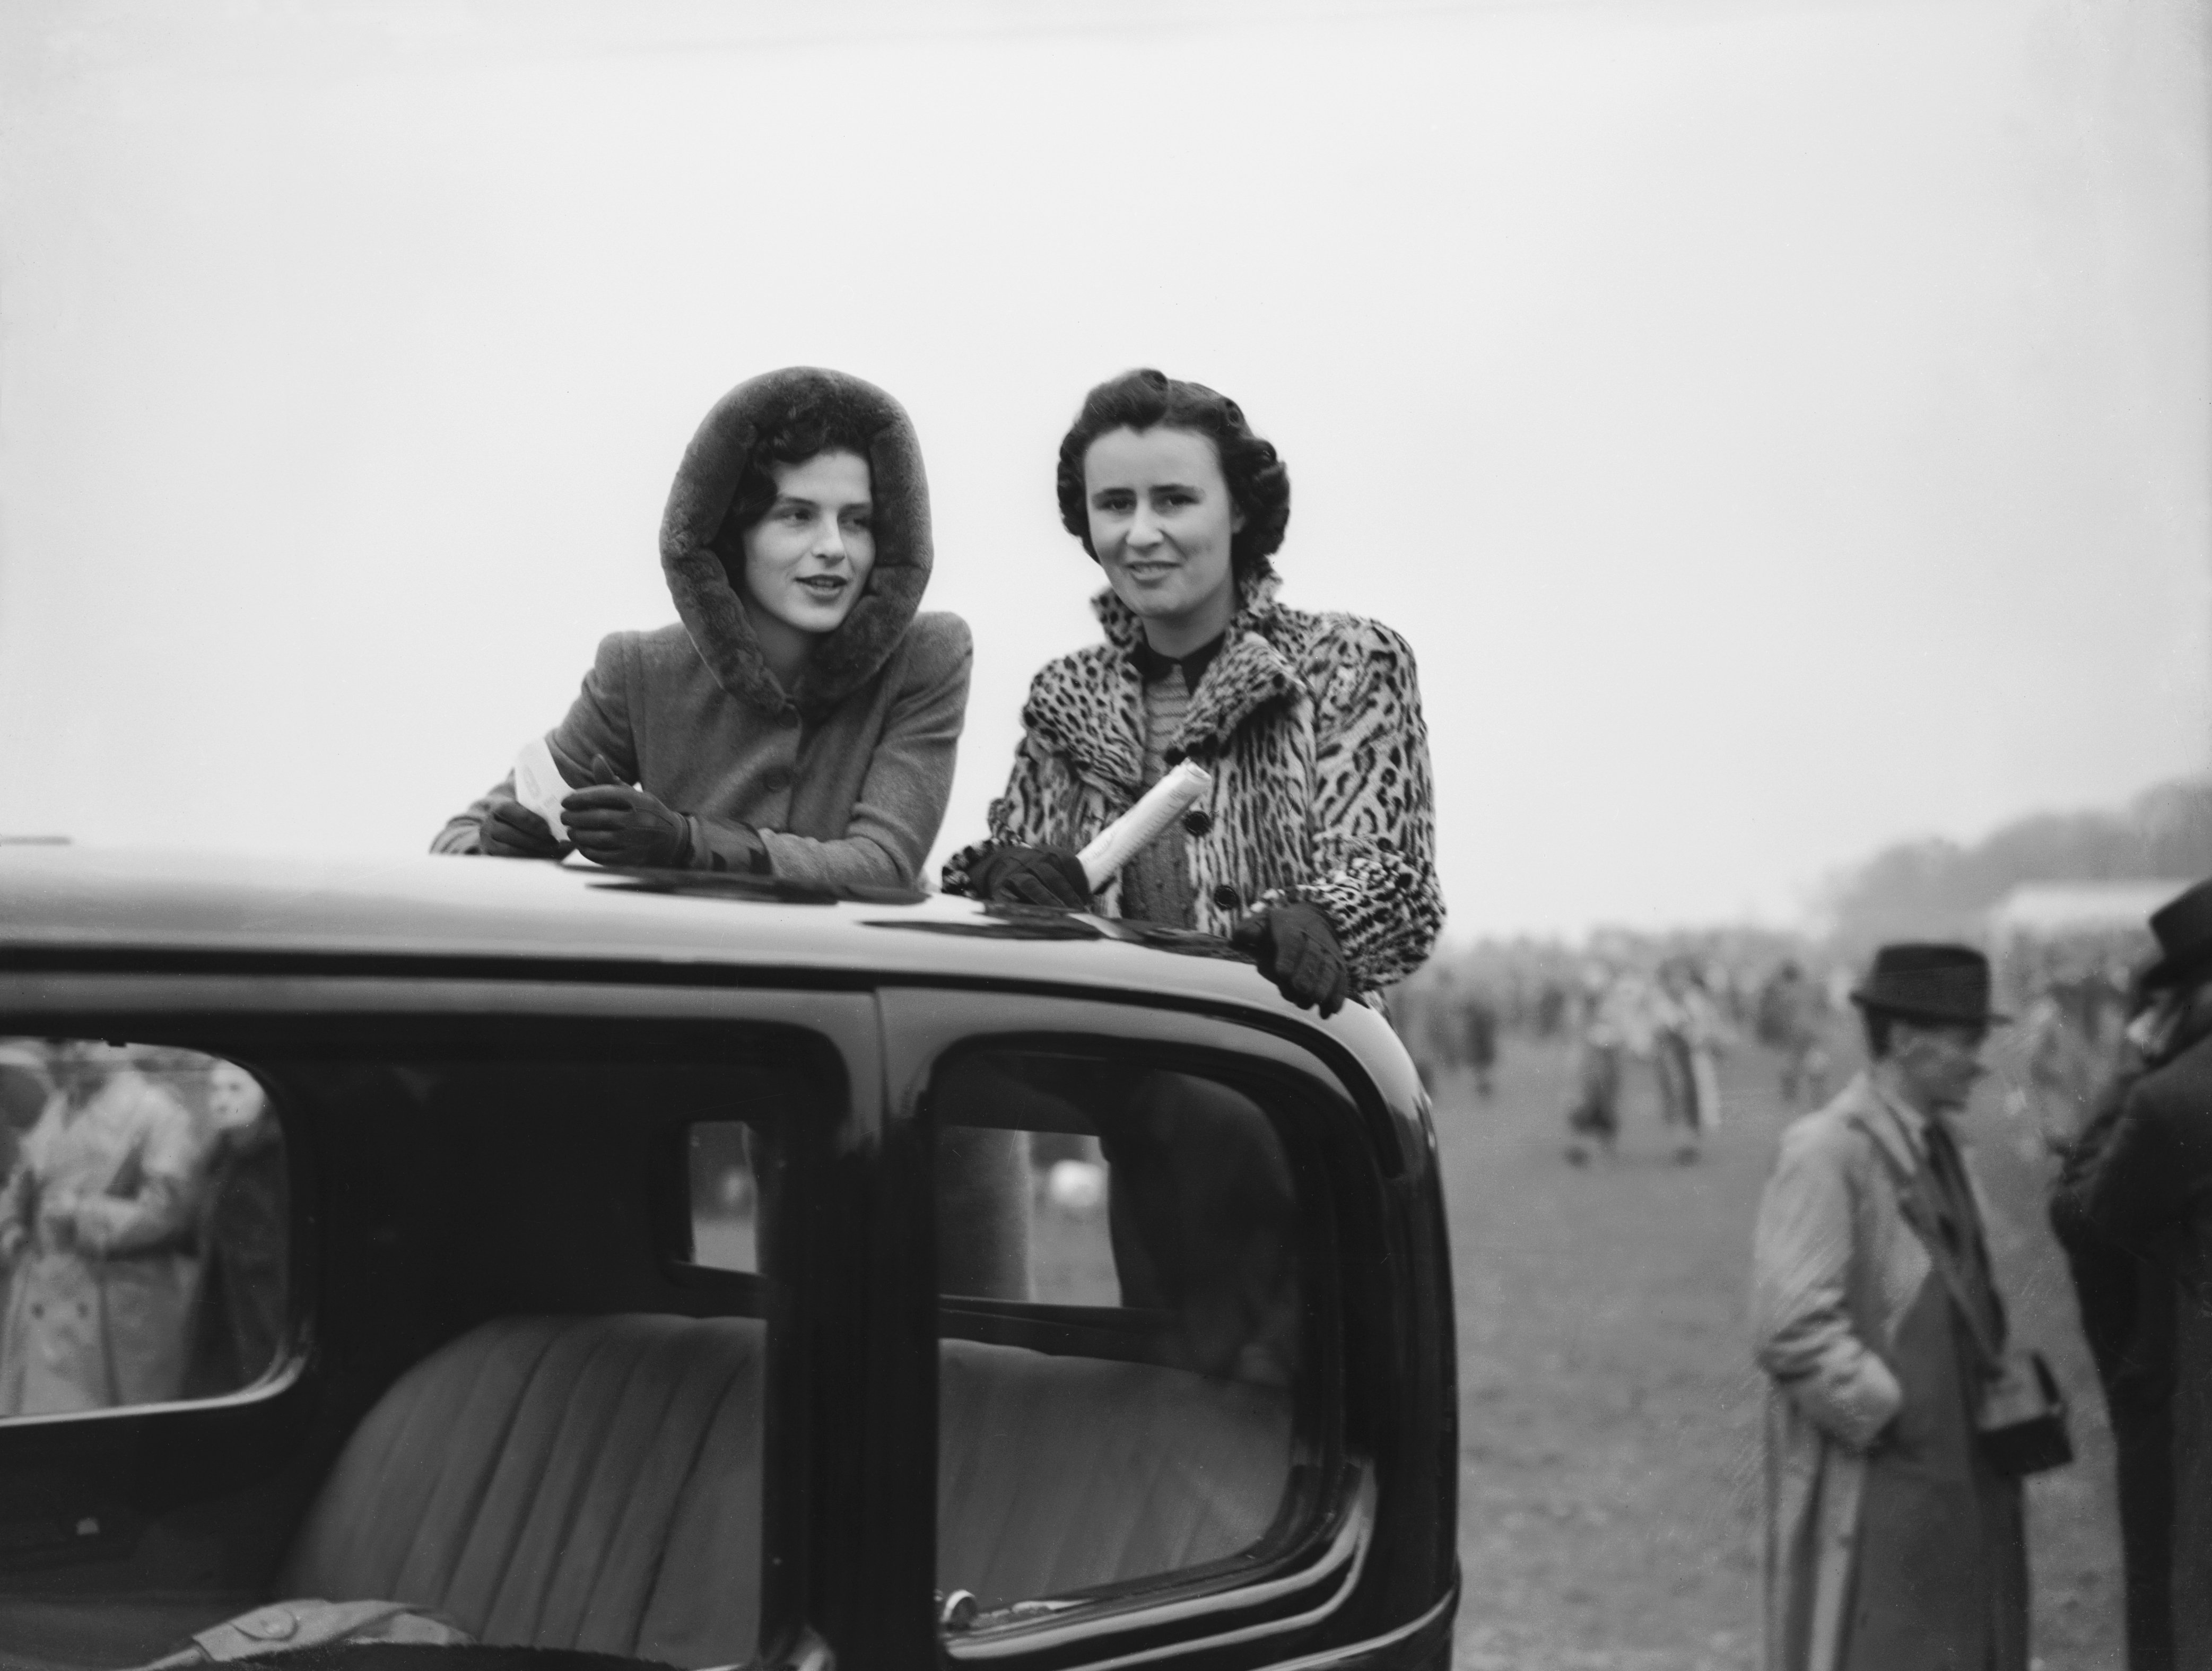 Osla Benning (left) and Babette Talbot Baines at the Whaddon Chase point-to-point at Nash, 1939. | Photo: Getty Images